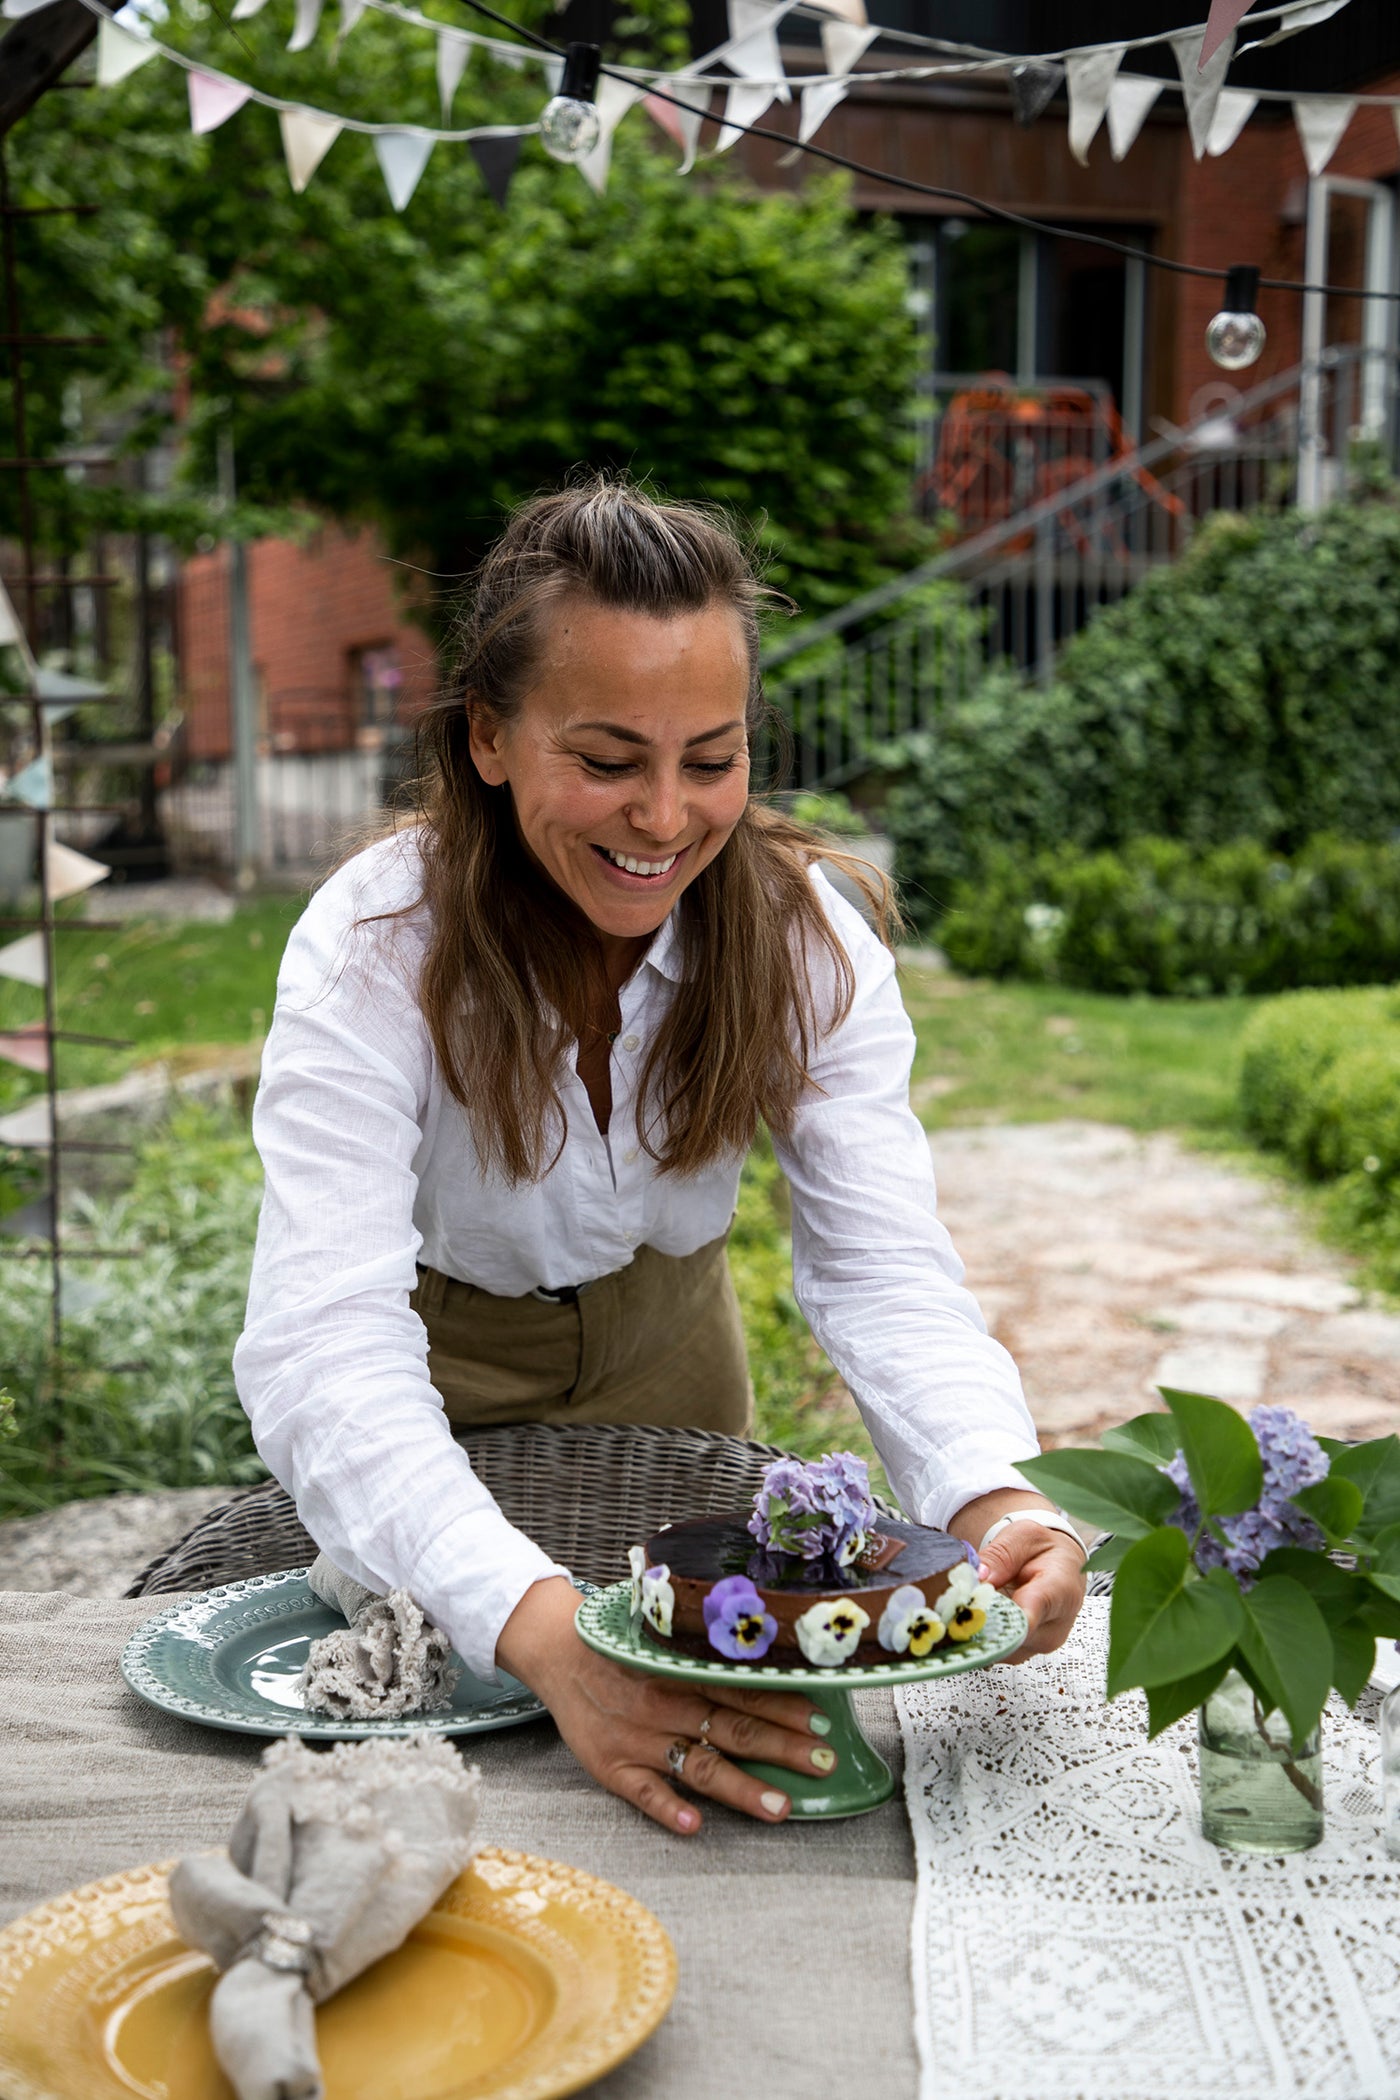 Johanna Hampf loves to set the table – and aspires for people to join her